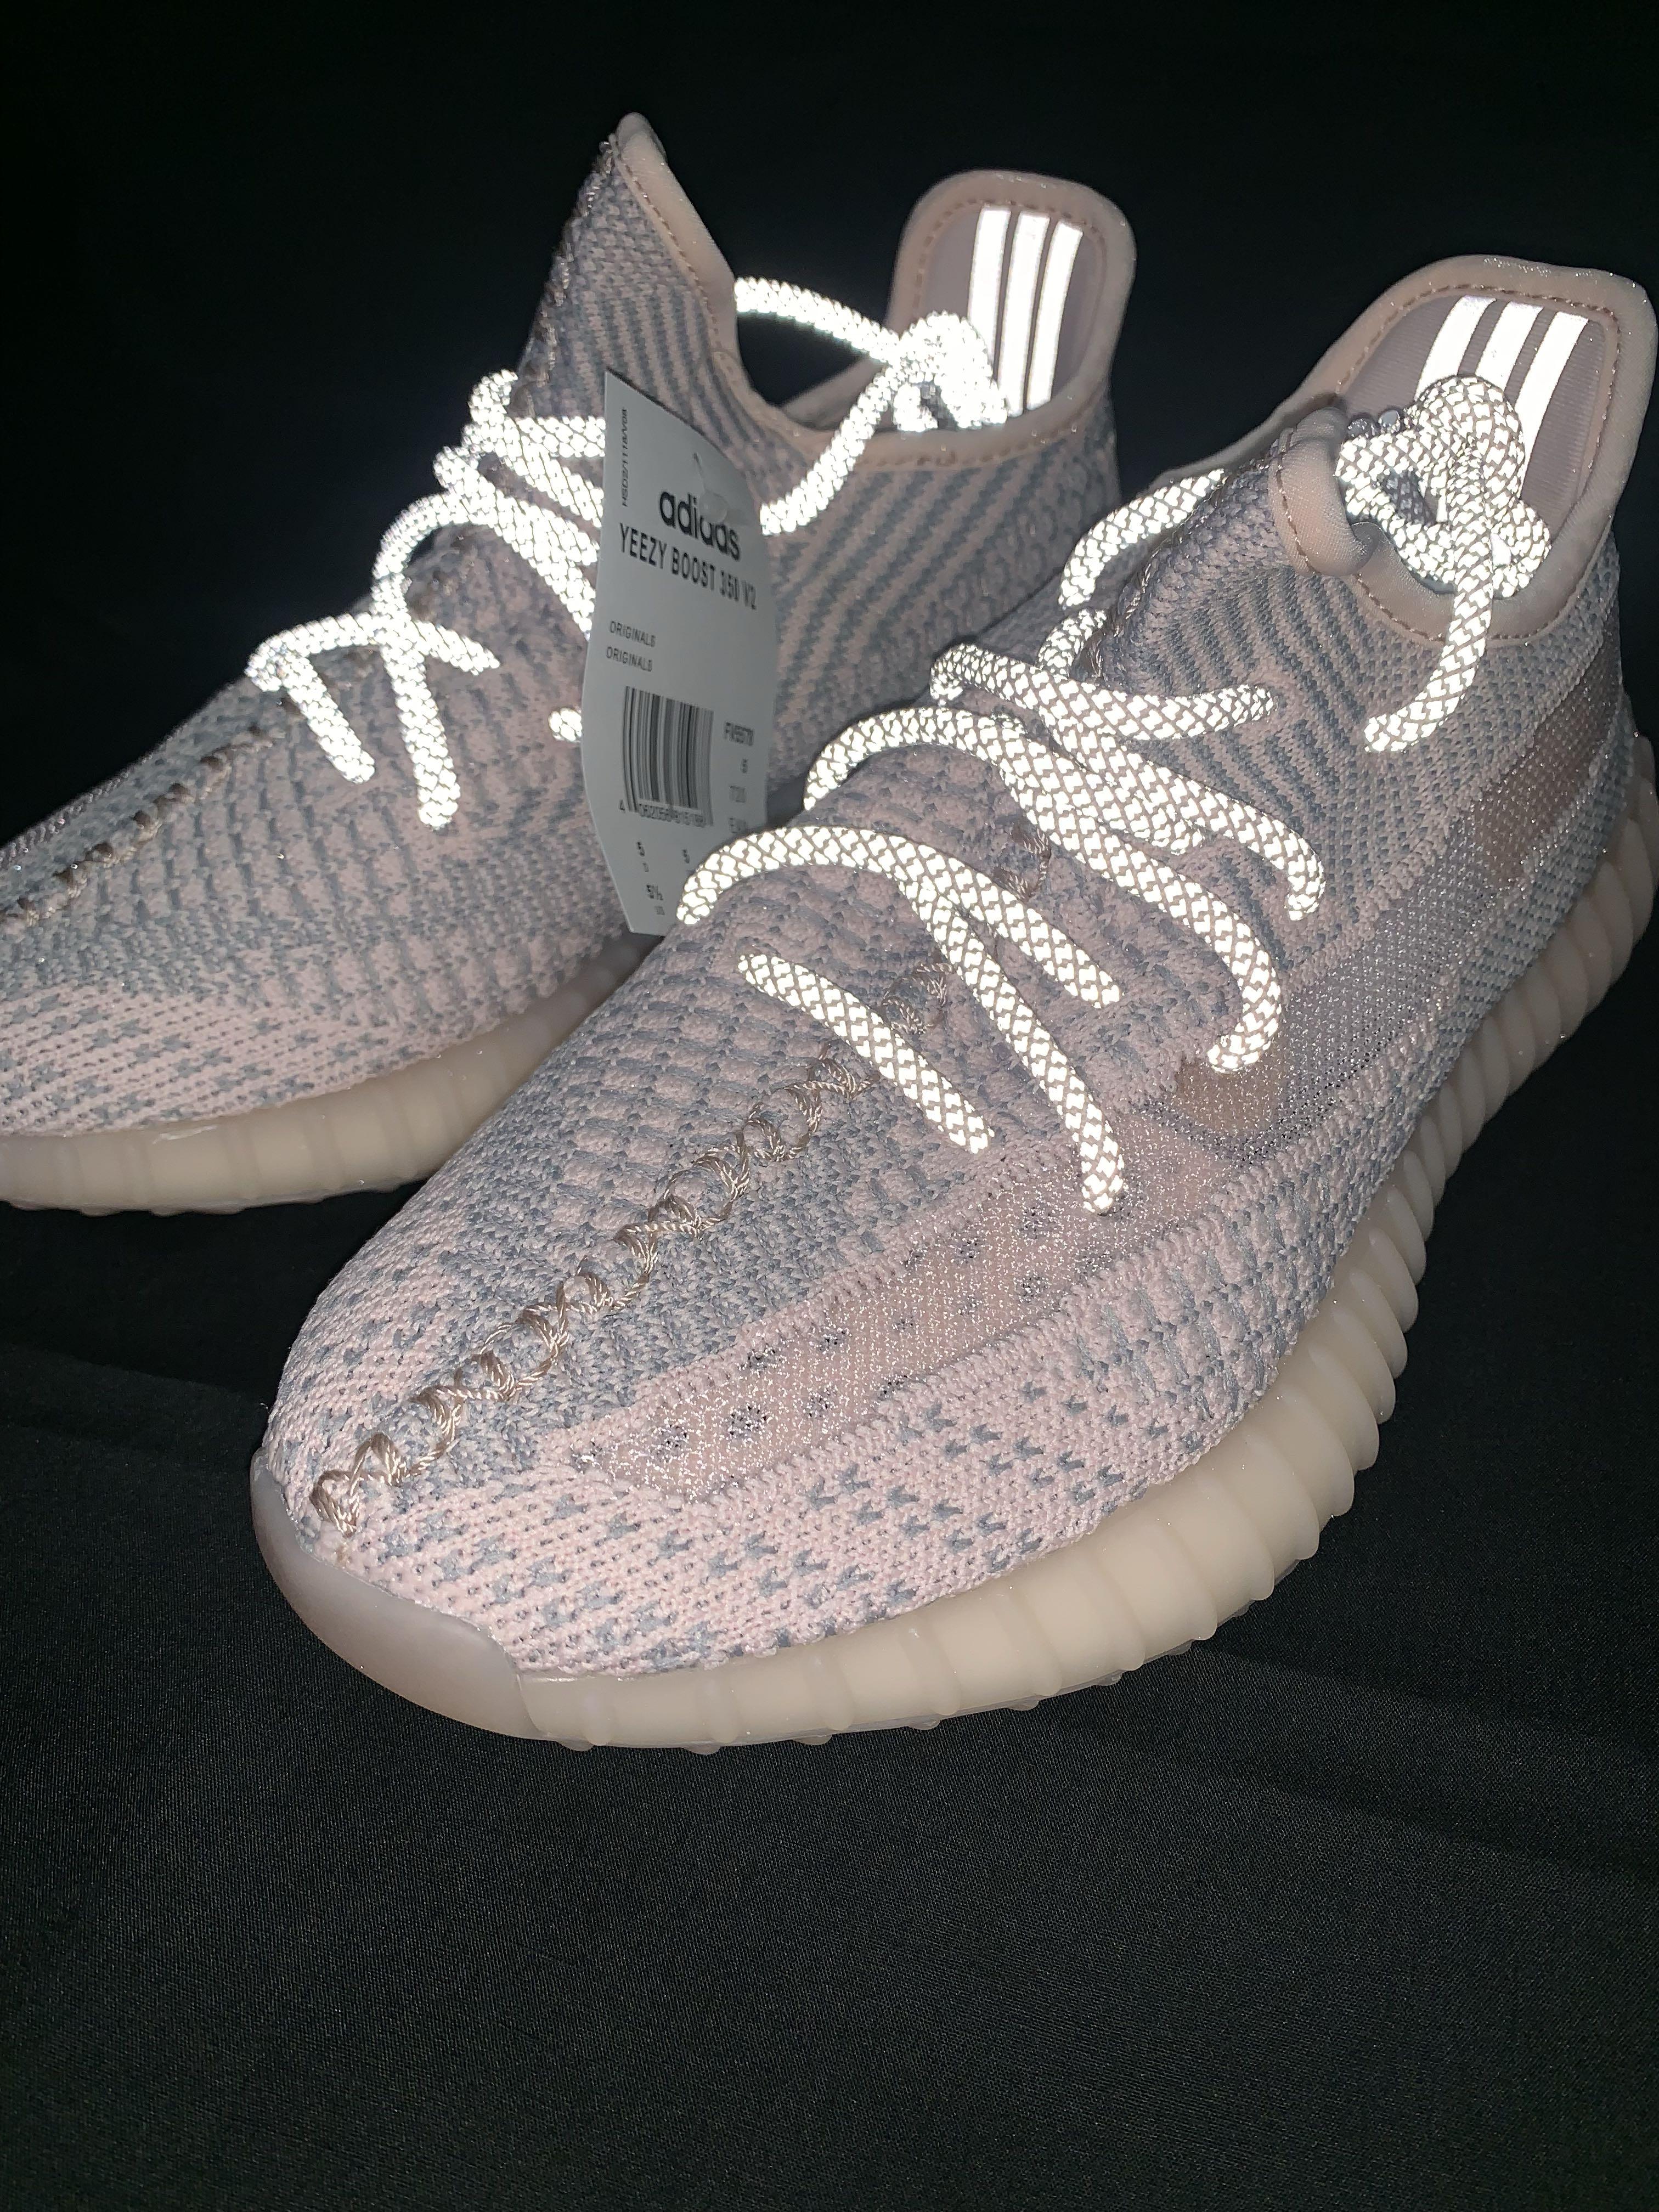 adidas Yeezy 350 Synth US7.5 NR, Men's 